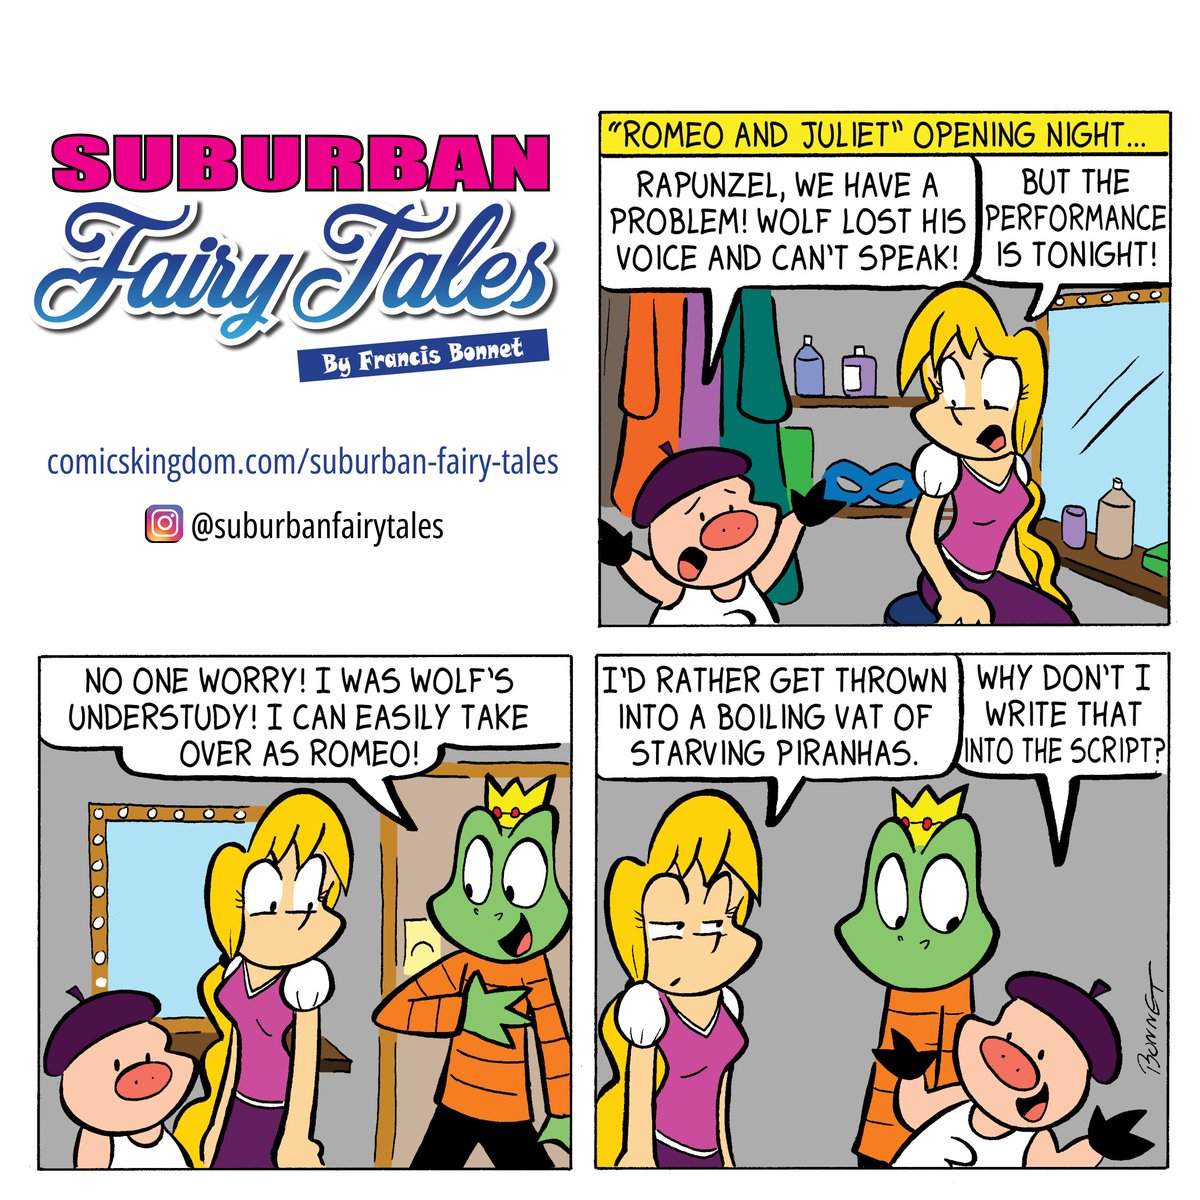 This comic is from Sept 2016. Rapunzel used to be a lot meaner to Frog Prince back in the day. She’s gotten nicer in later comics, but not by a lot. 
#cartoonist #comicseries #dailycomicstrip #fairytales #webcomic #openingday #theatrelife #romeoandjuliet